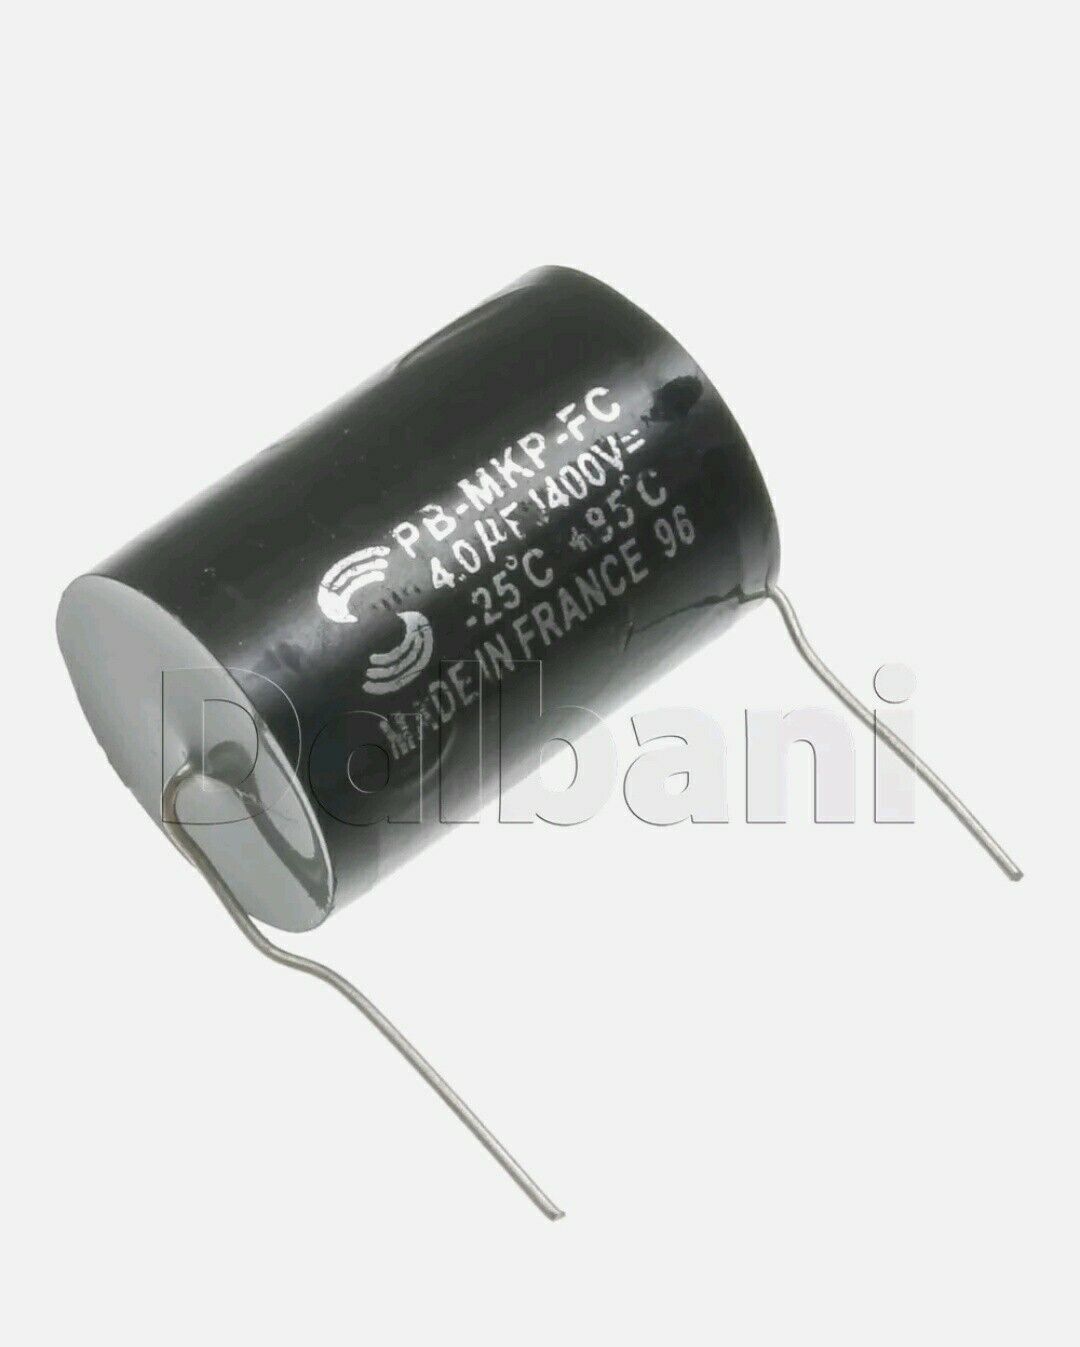 4x, PB-MKP-FC Metalized Polypropylene MKP Audio Capacitor 400V 4uF Axial Leads